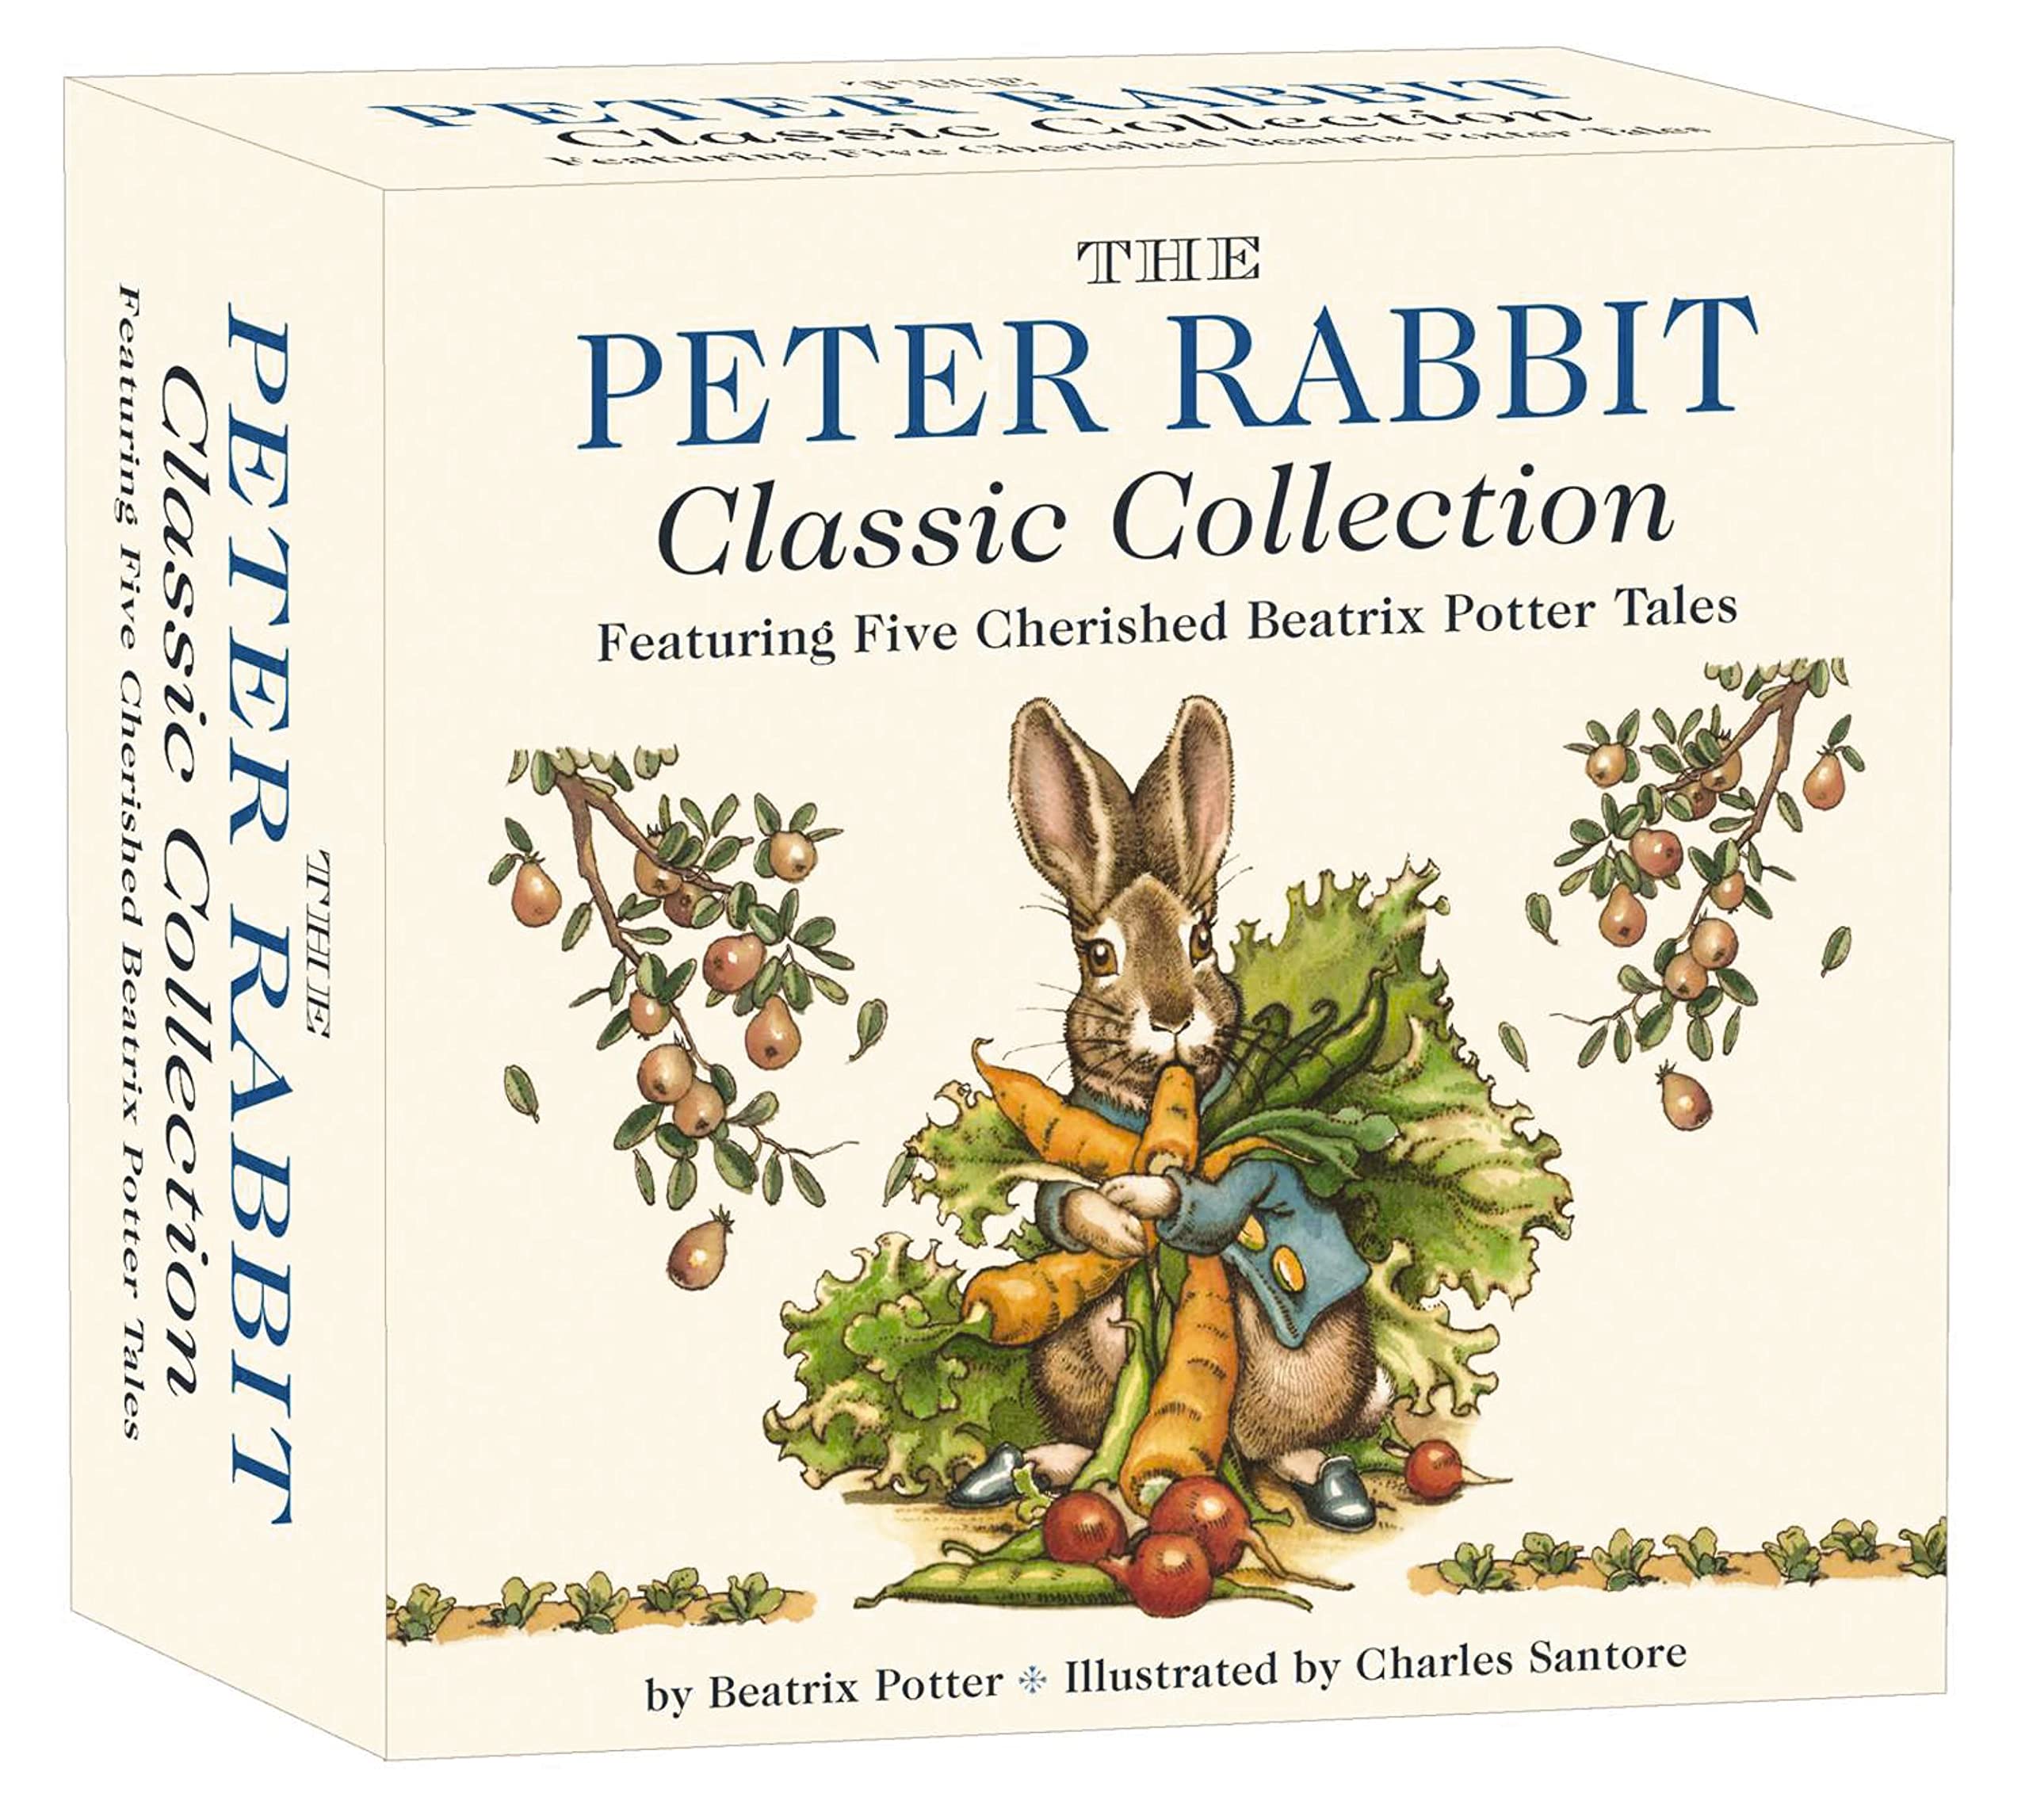 Book Cover The Peter Rabbit Classic Collection: A Board Book Box Set Including Peter Rabbit, Jeremy Fisher, Benjamin Bunny, Two Bad Mice, and Flopsy Bunnies (Beatrix Potter Collection) (The Classic Edition)